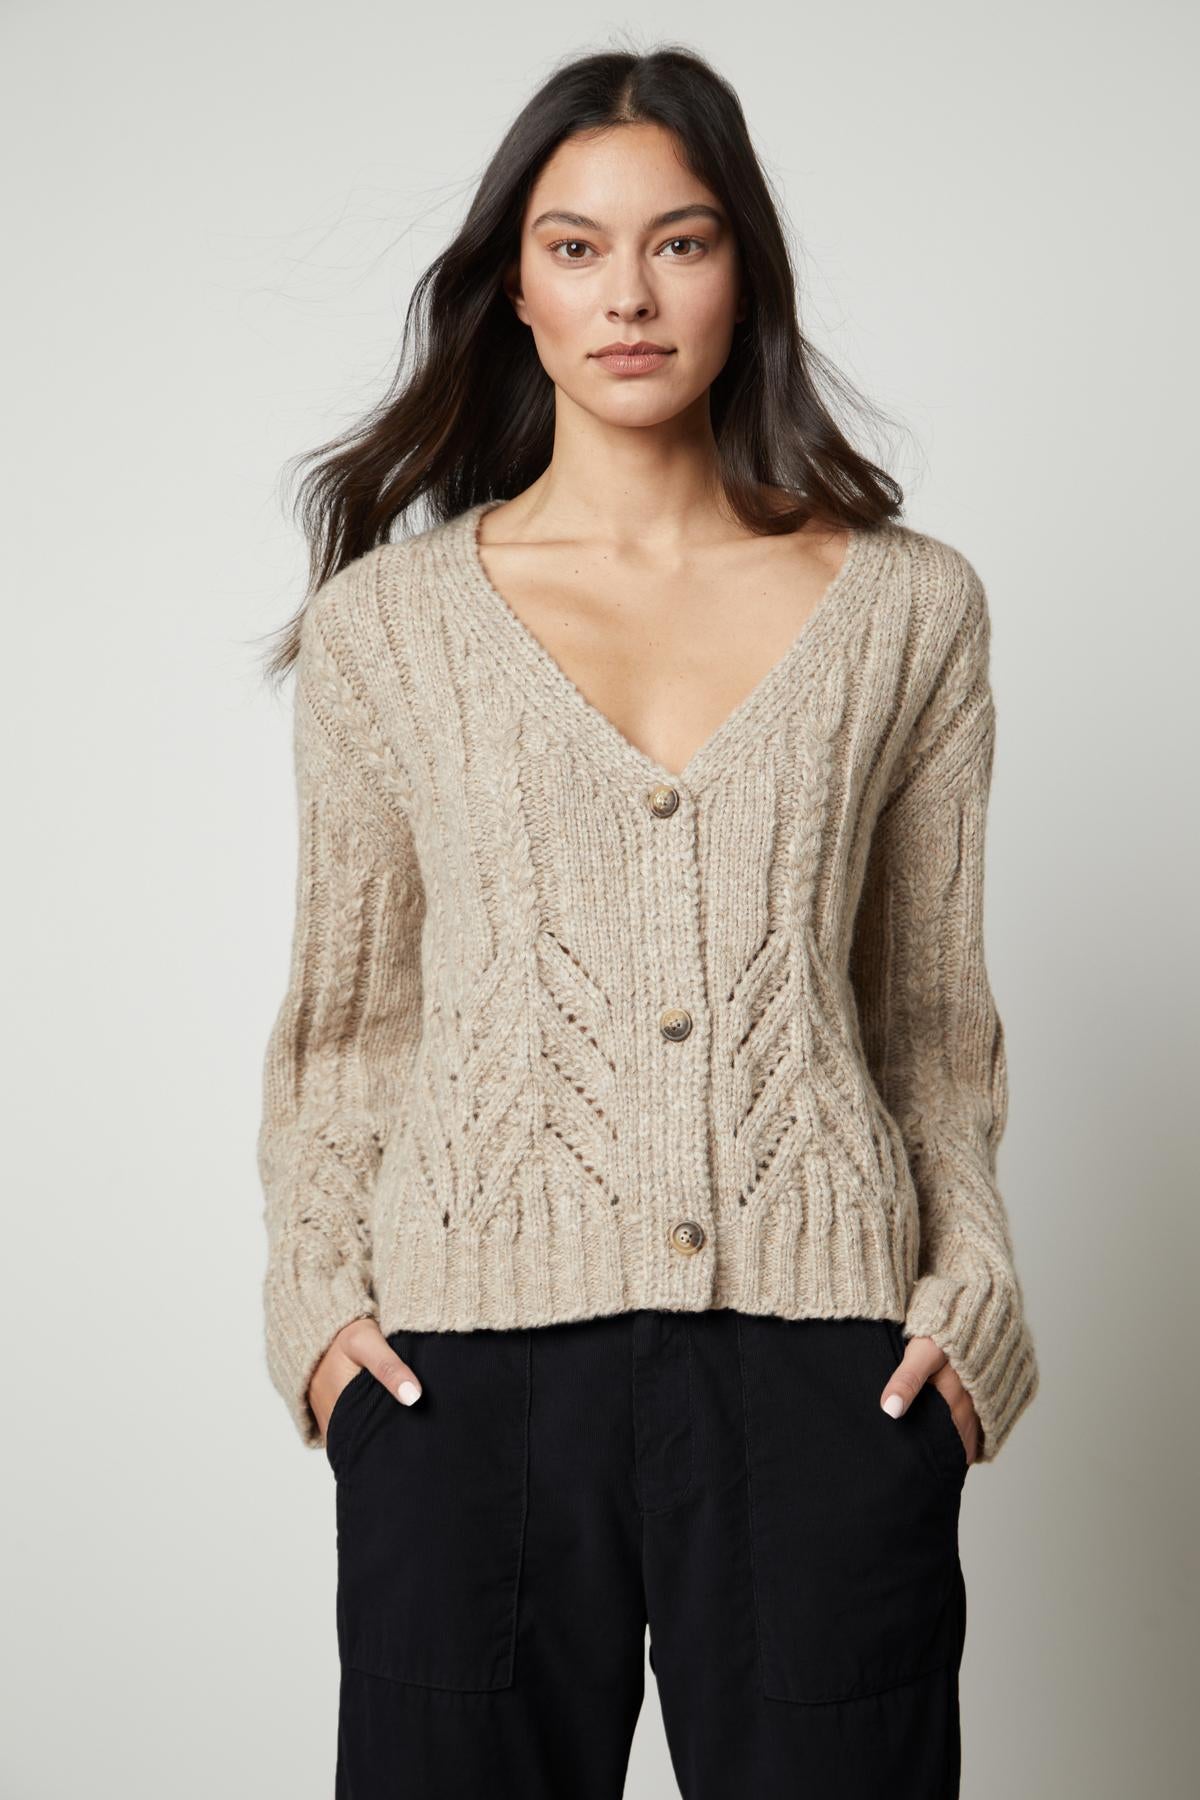 A woman wearing a Velvet by Graham & Spencer HAZEL ALPACA CABLE KNIT CARDIGAN and black pants.-26897822286017